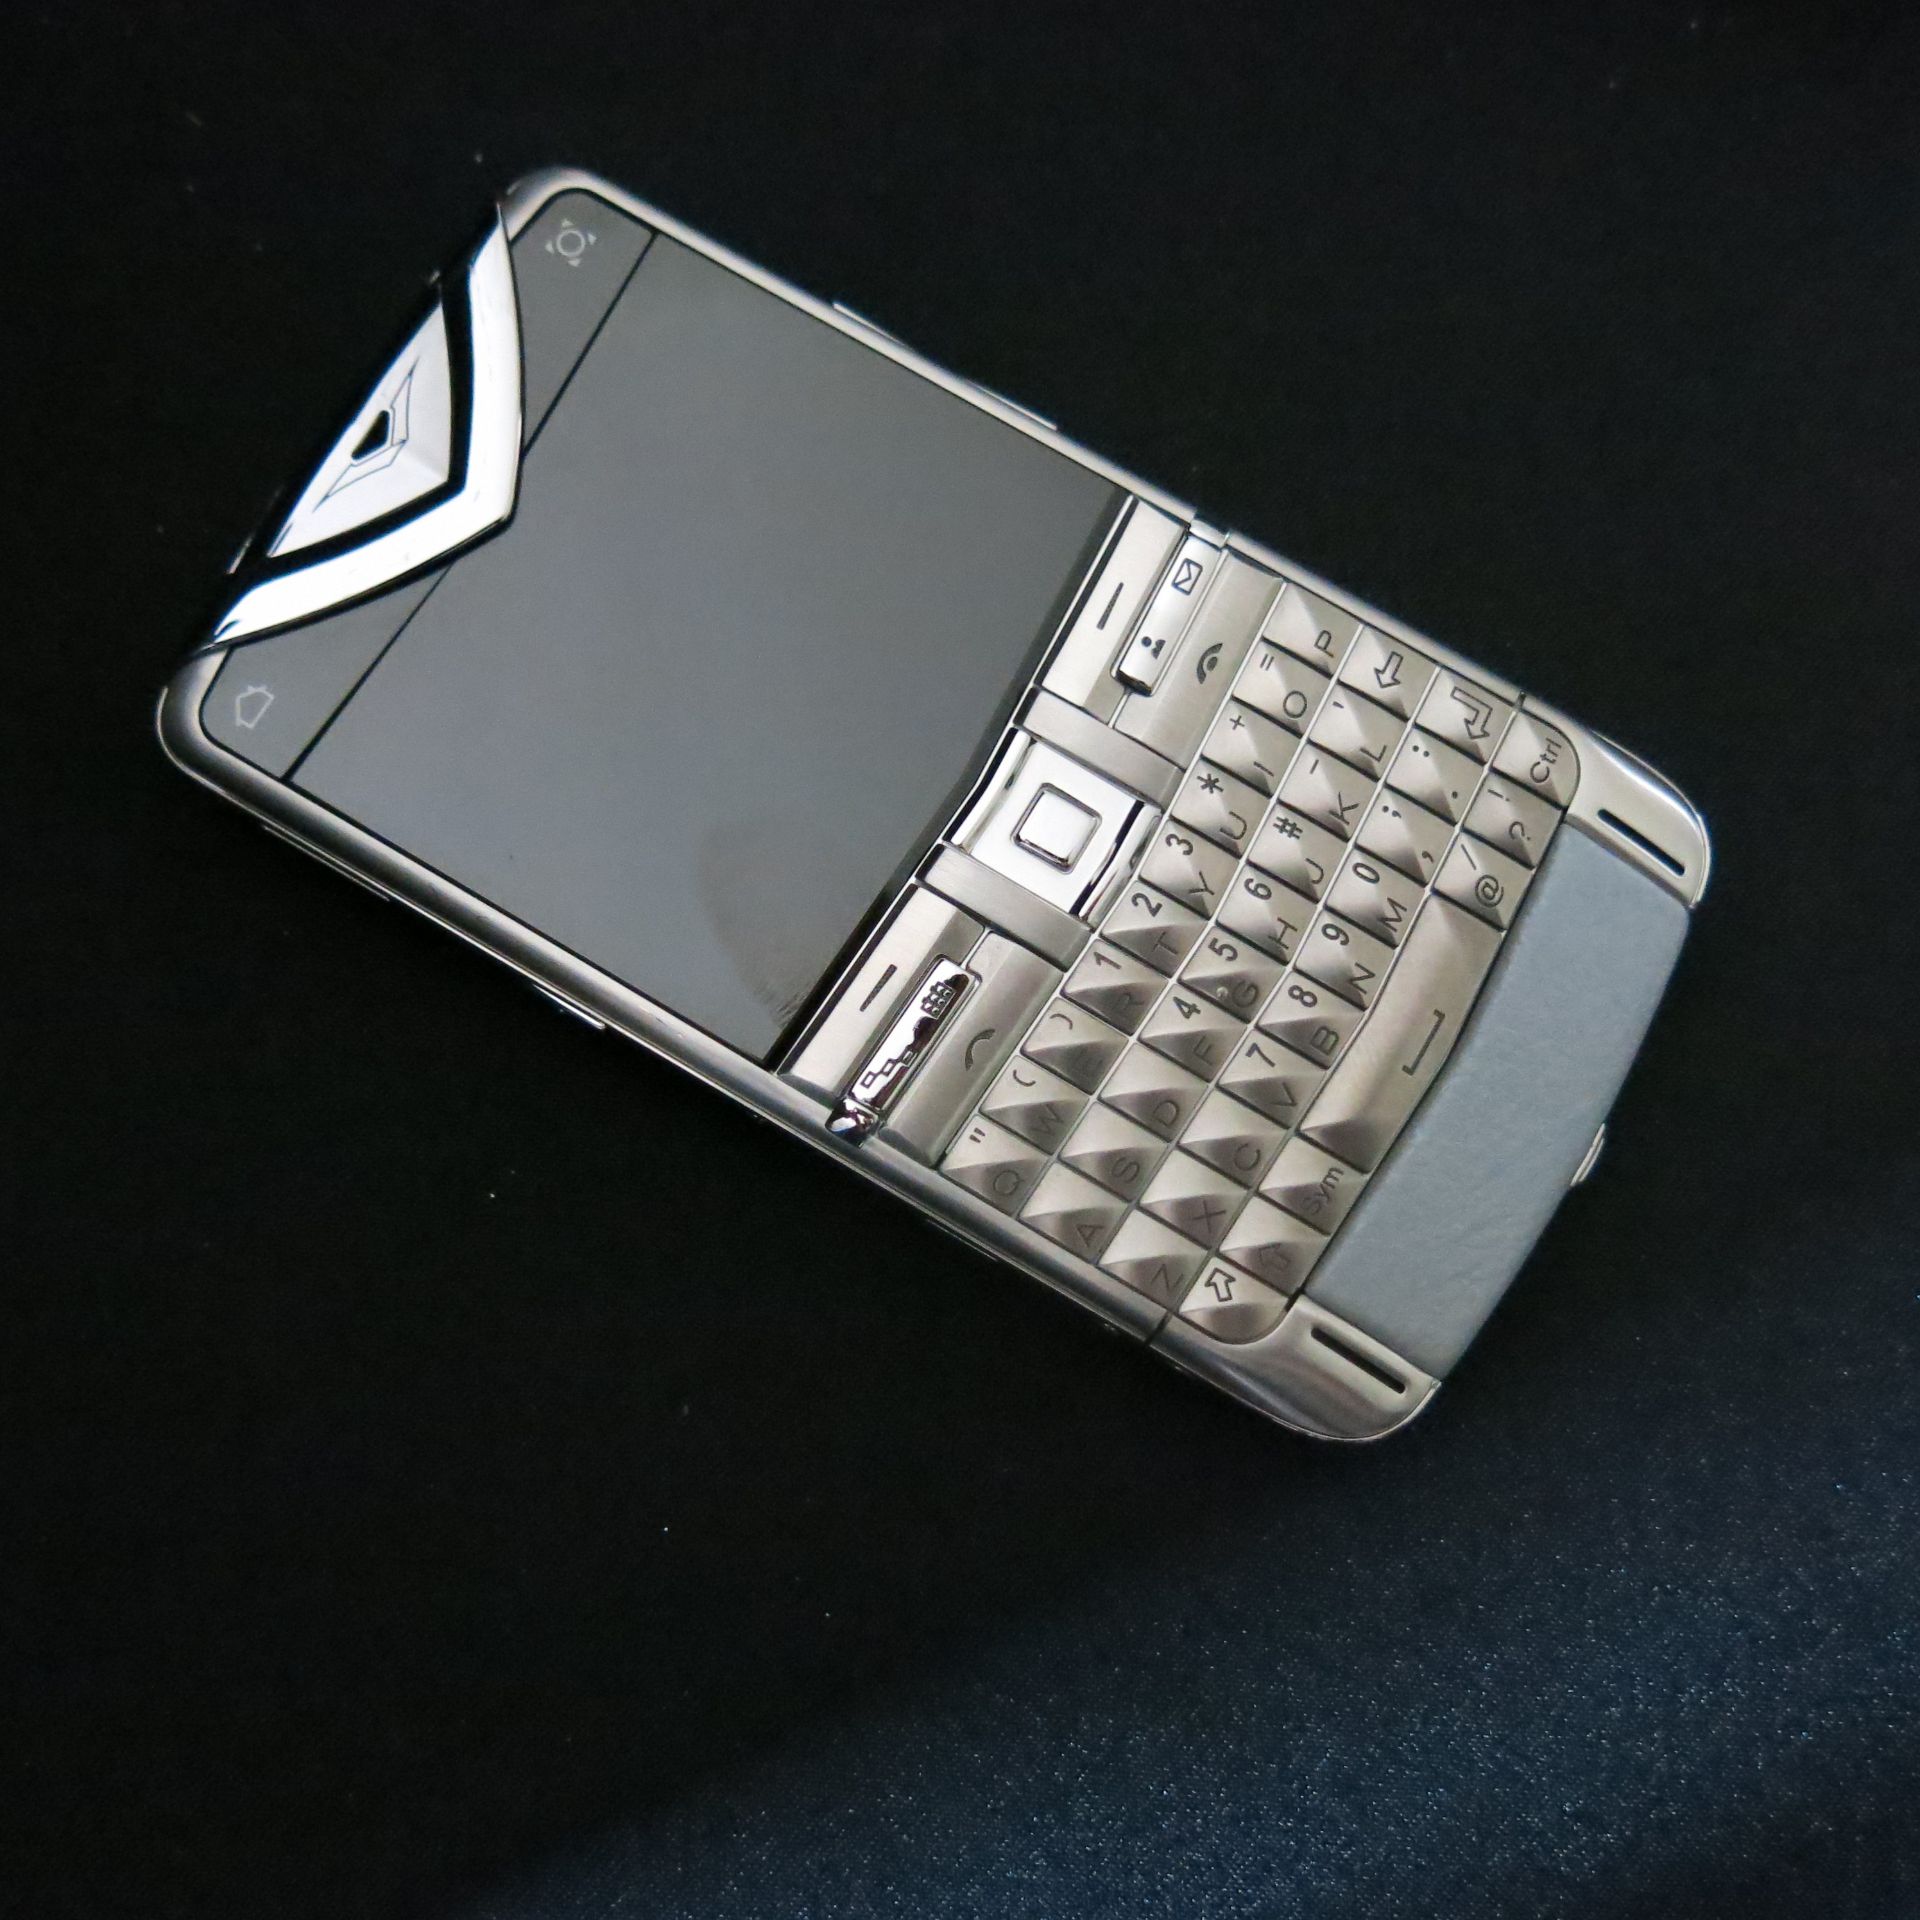 Entire Contents of the VERTU Museum Collection to Include: 105 Various Iconic Phones & Appearance - Image 72 of 106